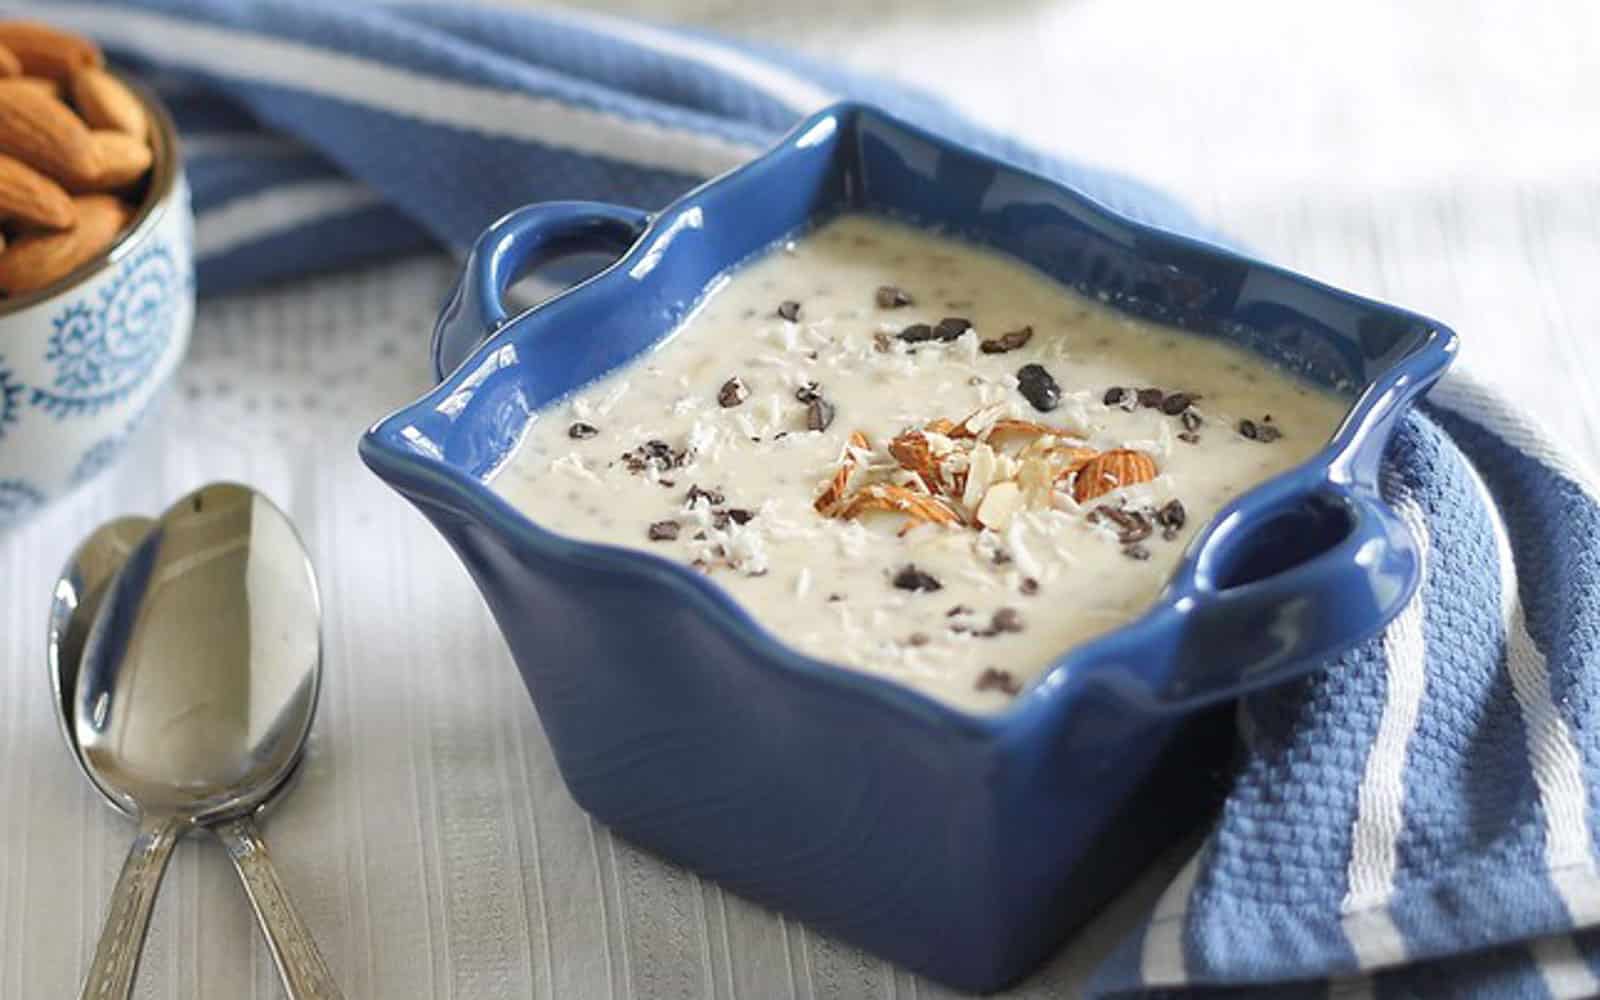 Overnight almond joy oats with chocolate chips, coconut and almonds in a blue bowl.